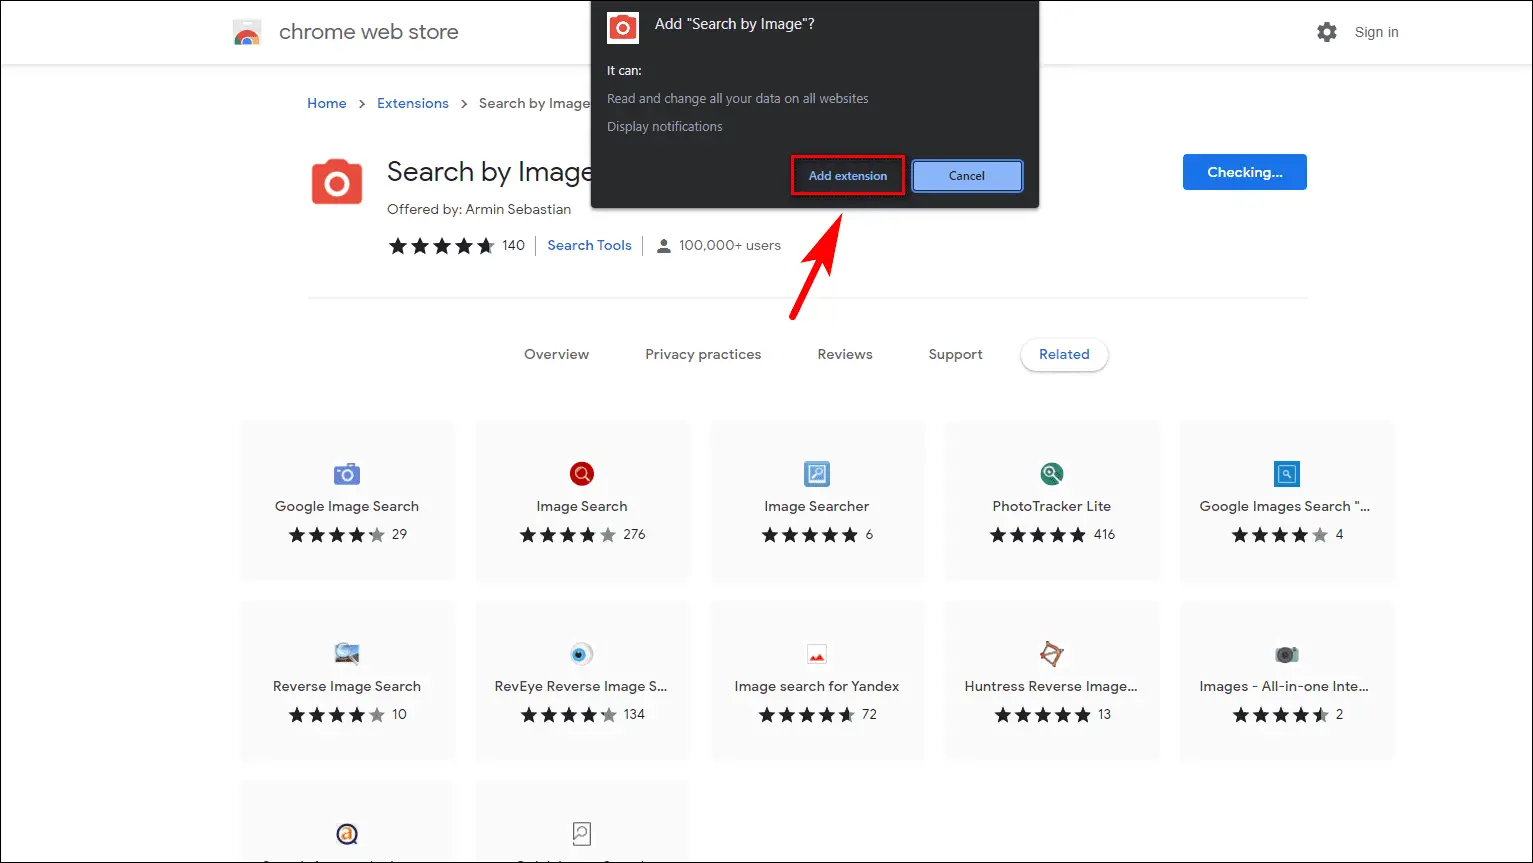 Re-enable Reverse Image Search in Google Chrome